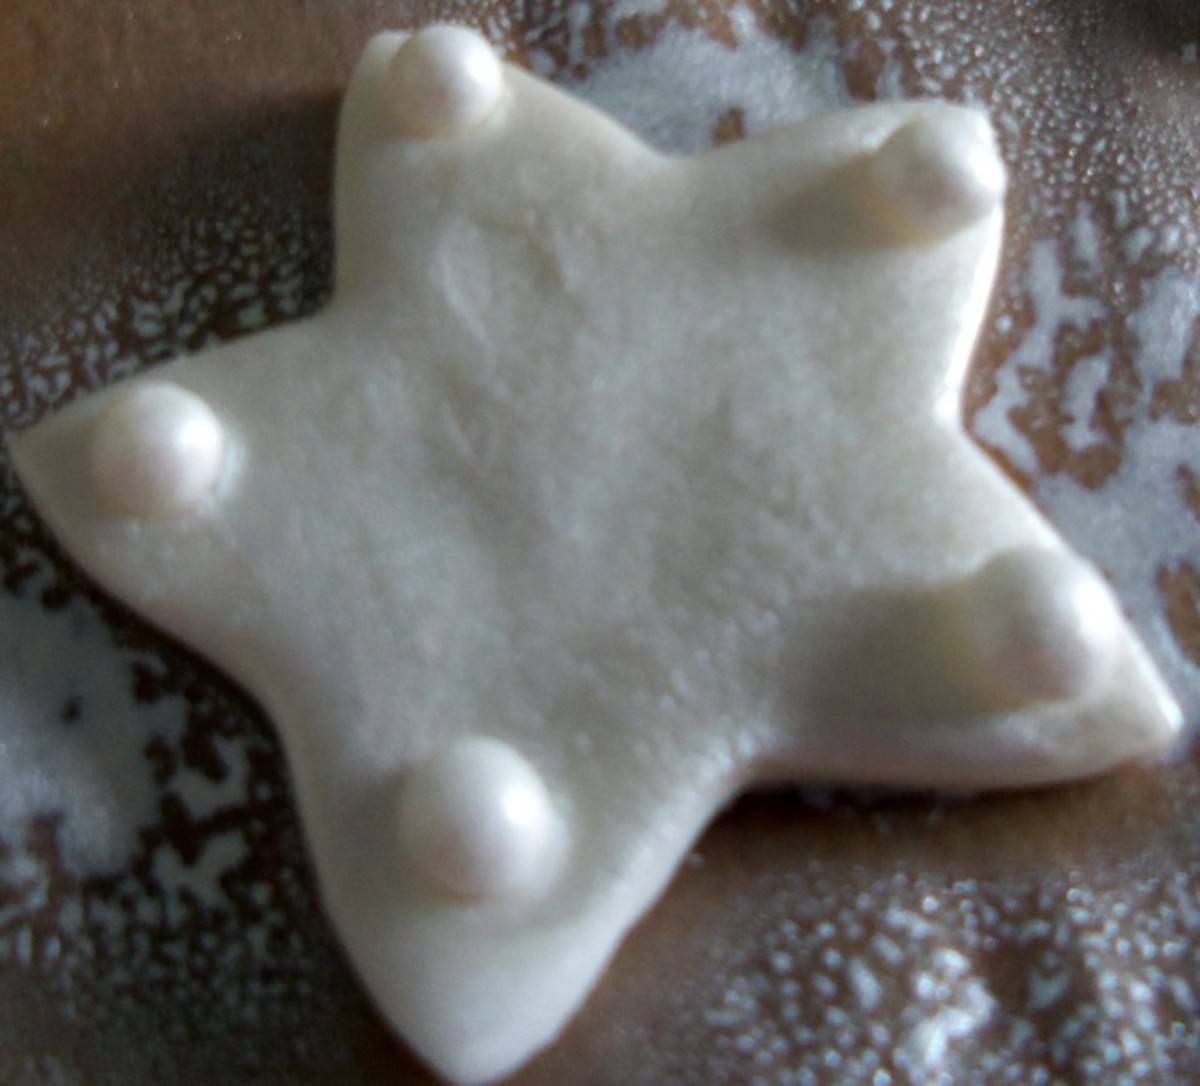 Do something different with the star for the top of the cookie tree so that it stands out.